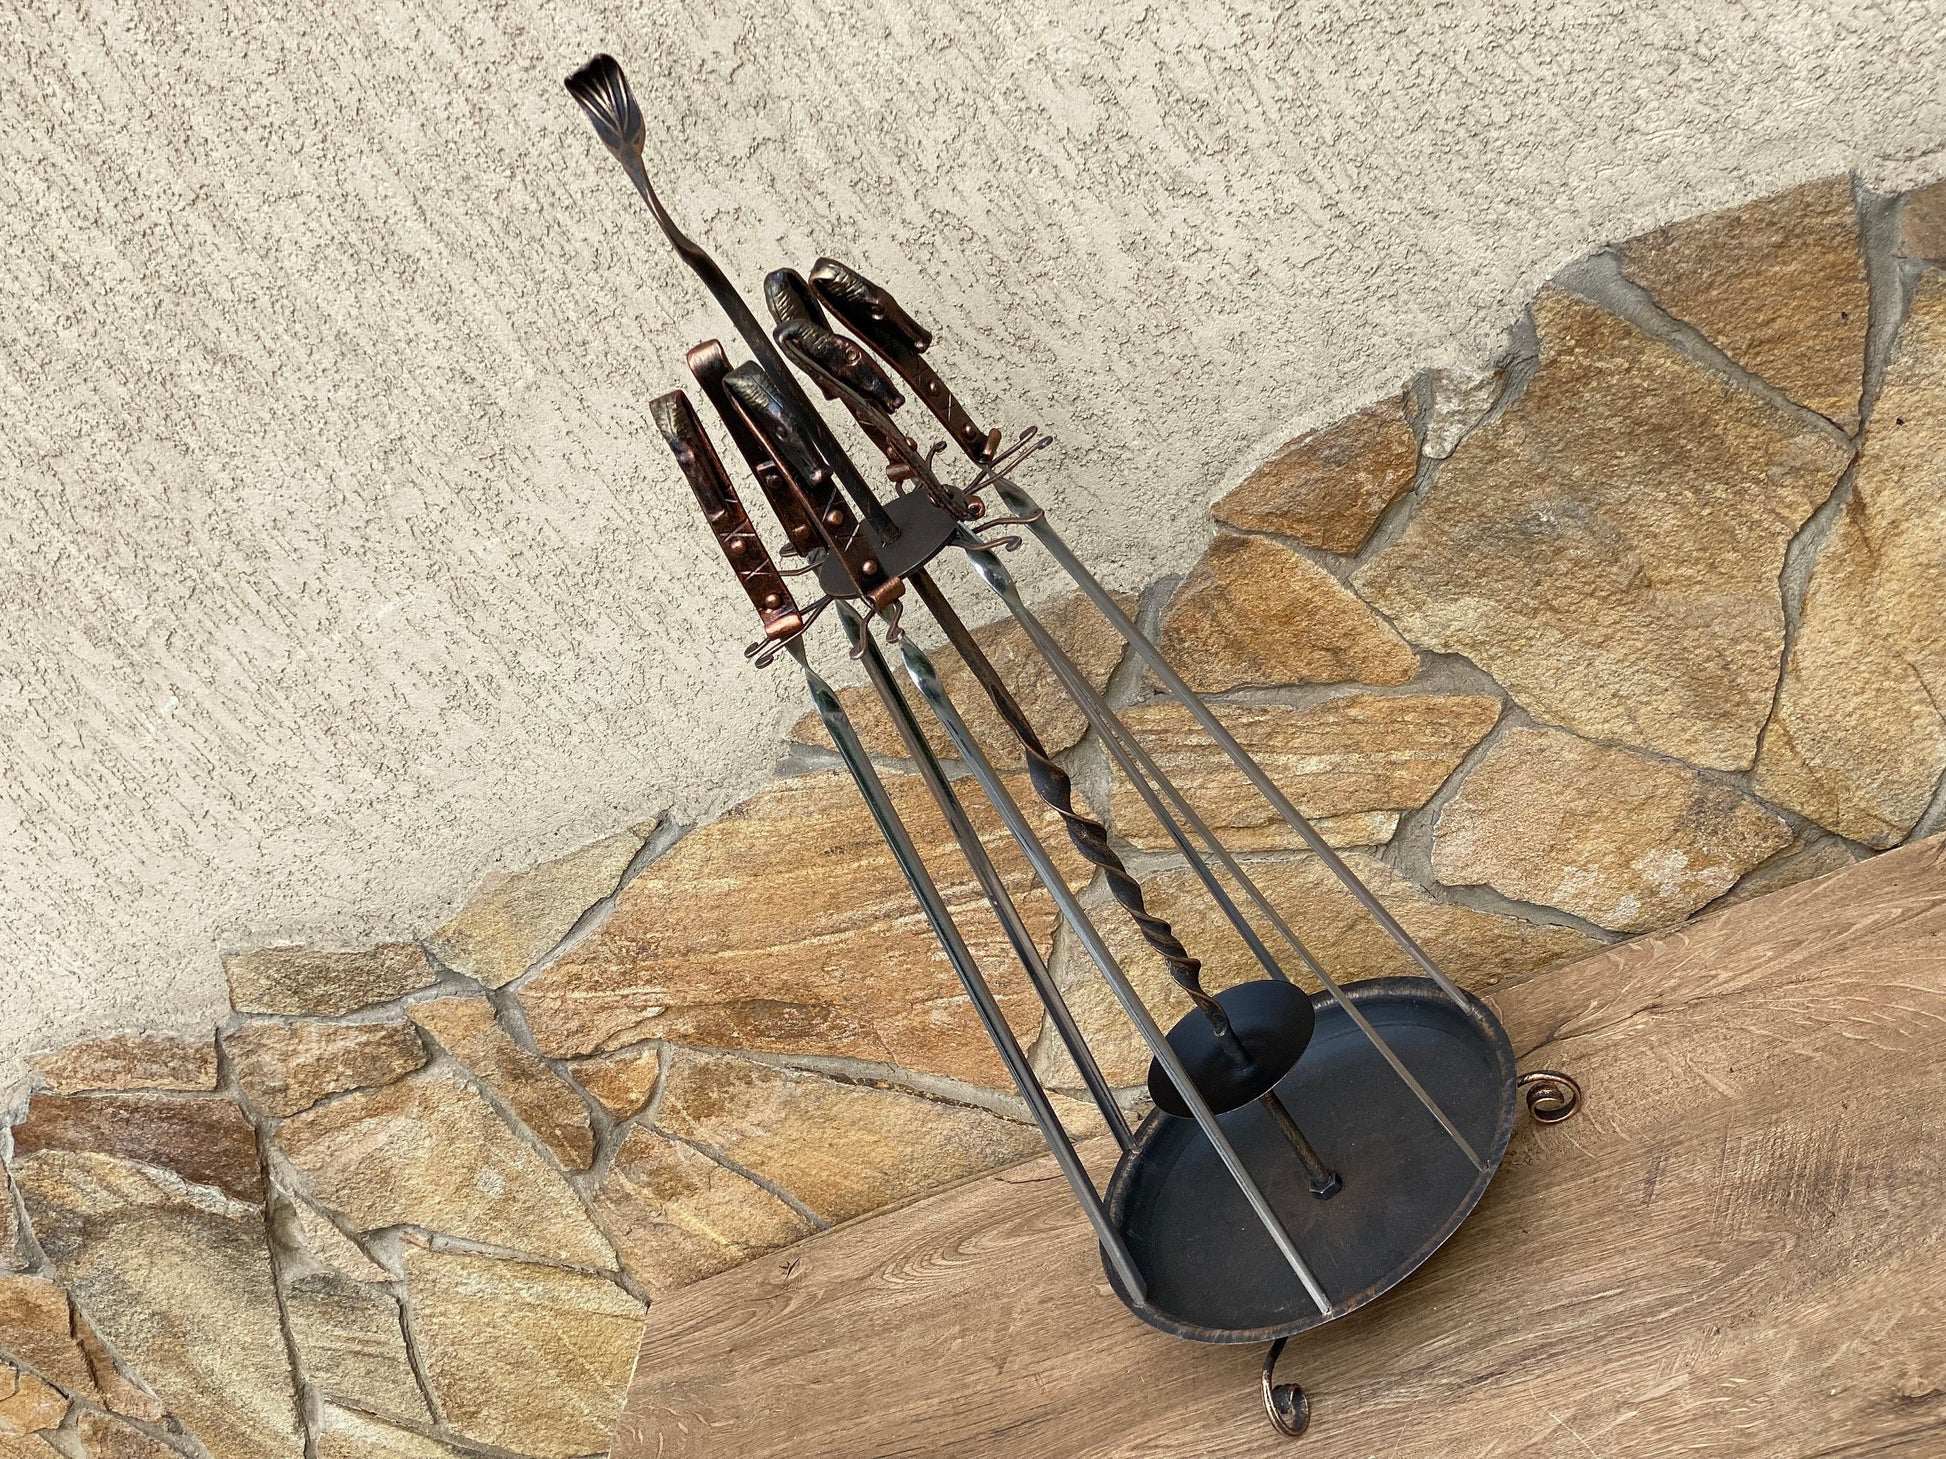 Skewers, steel gift, anniversary gift, grill accessories, barbecue, BBQ, Christmas, birthday, mens gift, horse decor, horse head, horse gift